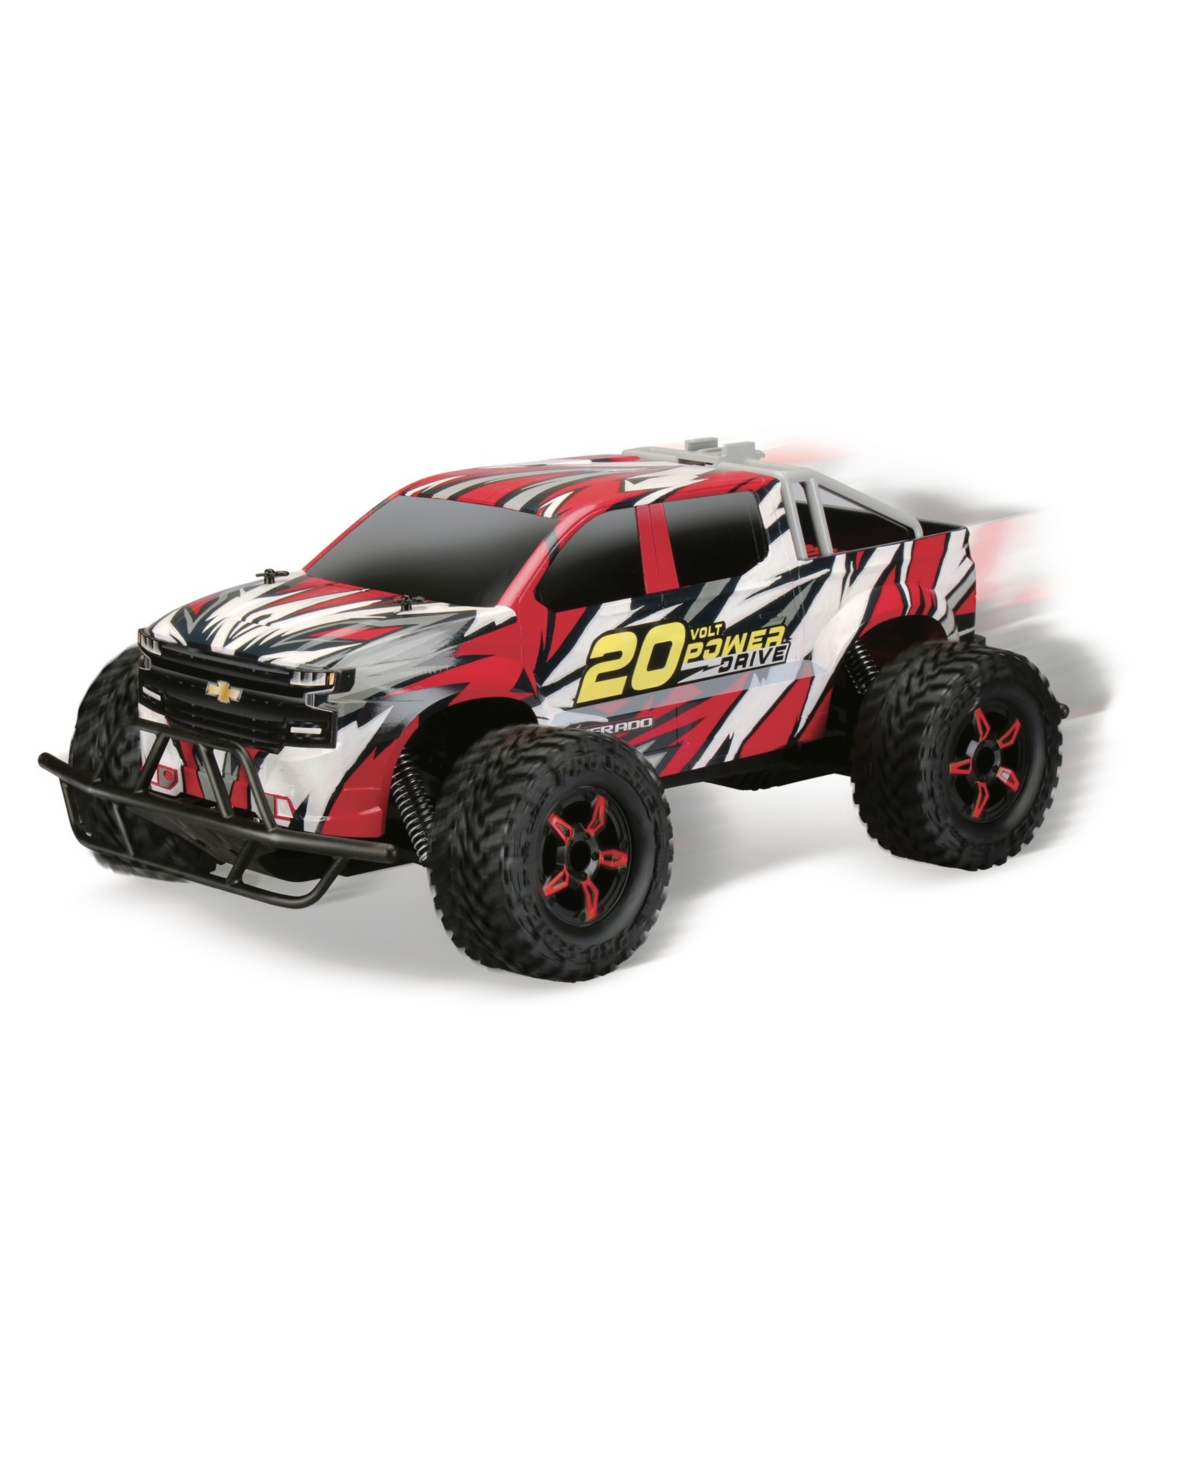 Kid Galaxy - Power Drive Hobby Grade Chevrolet Remote Control Vehicle In Multi